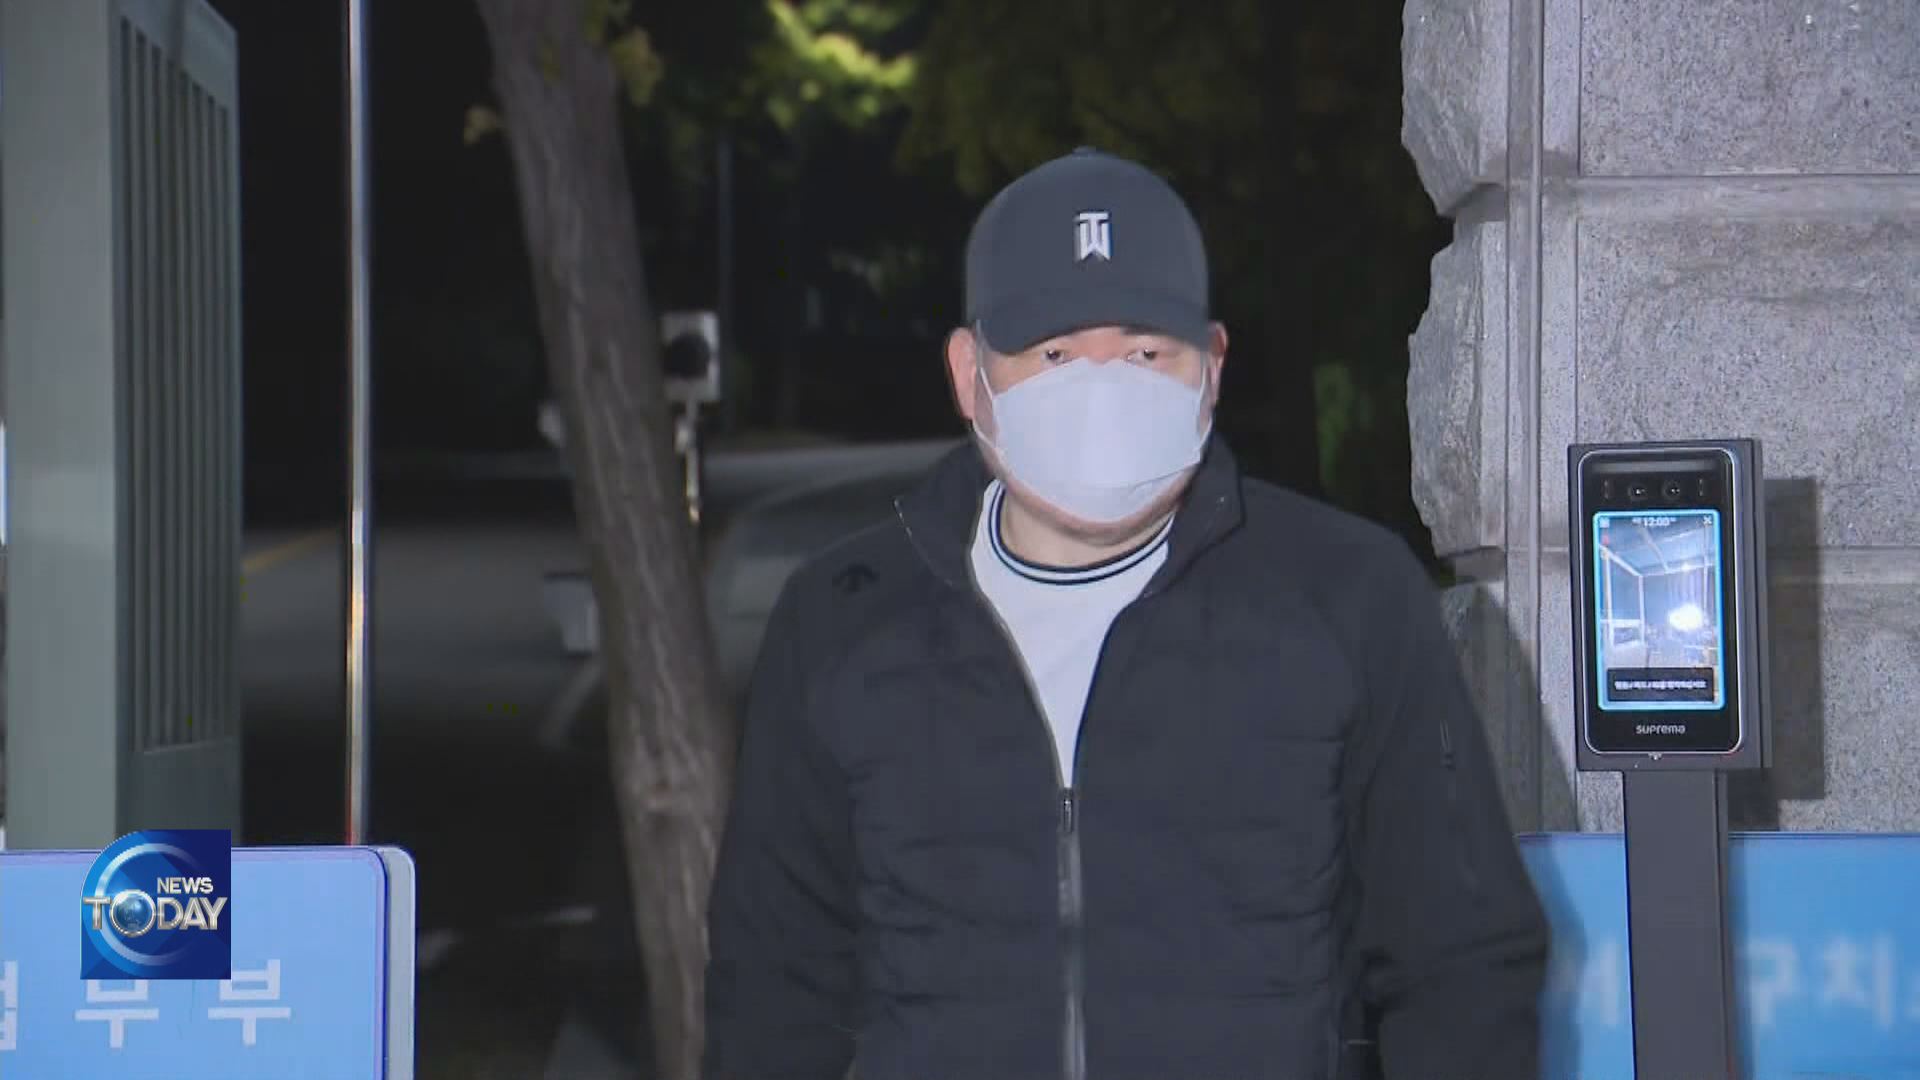 YOO DONG-GYU RELEASED FROM PRISON